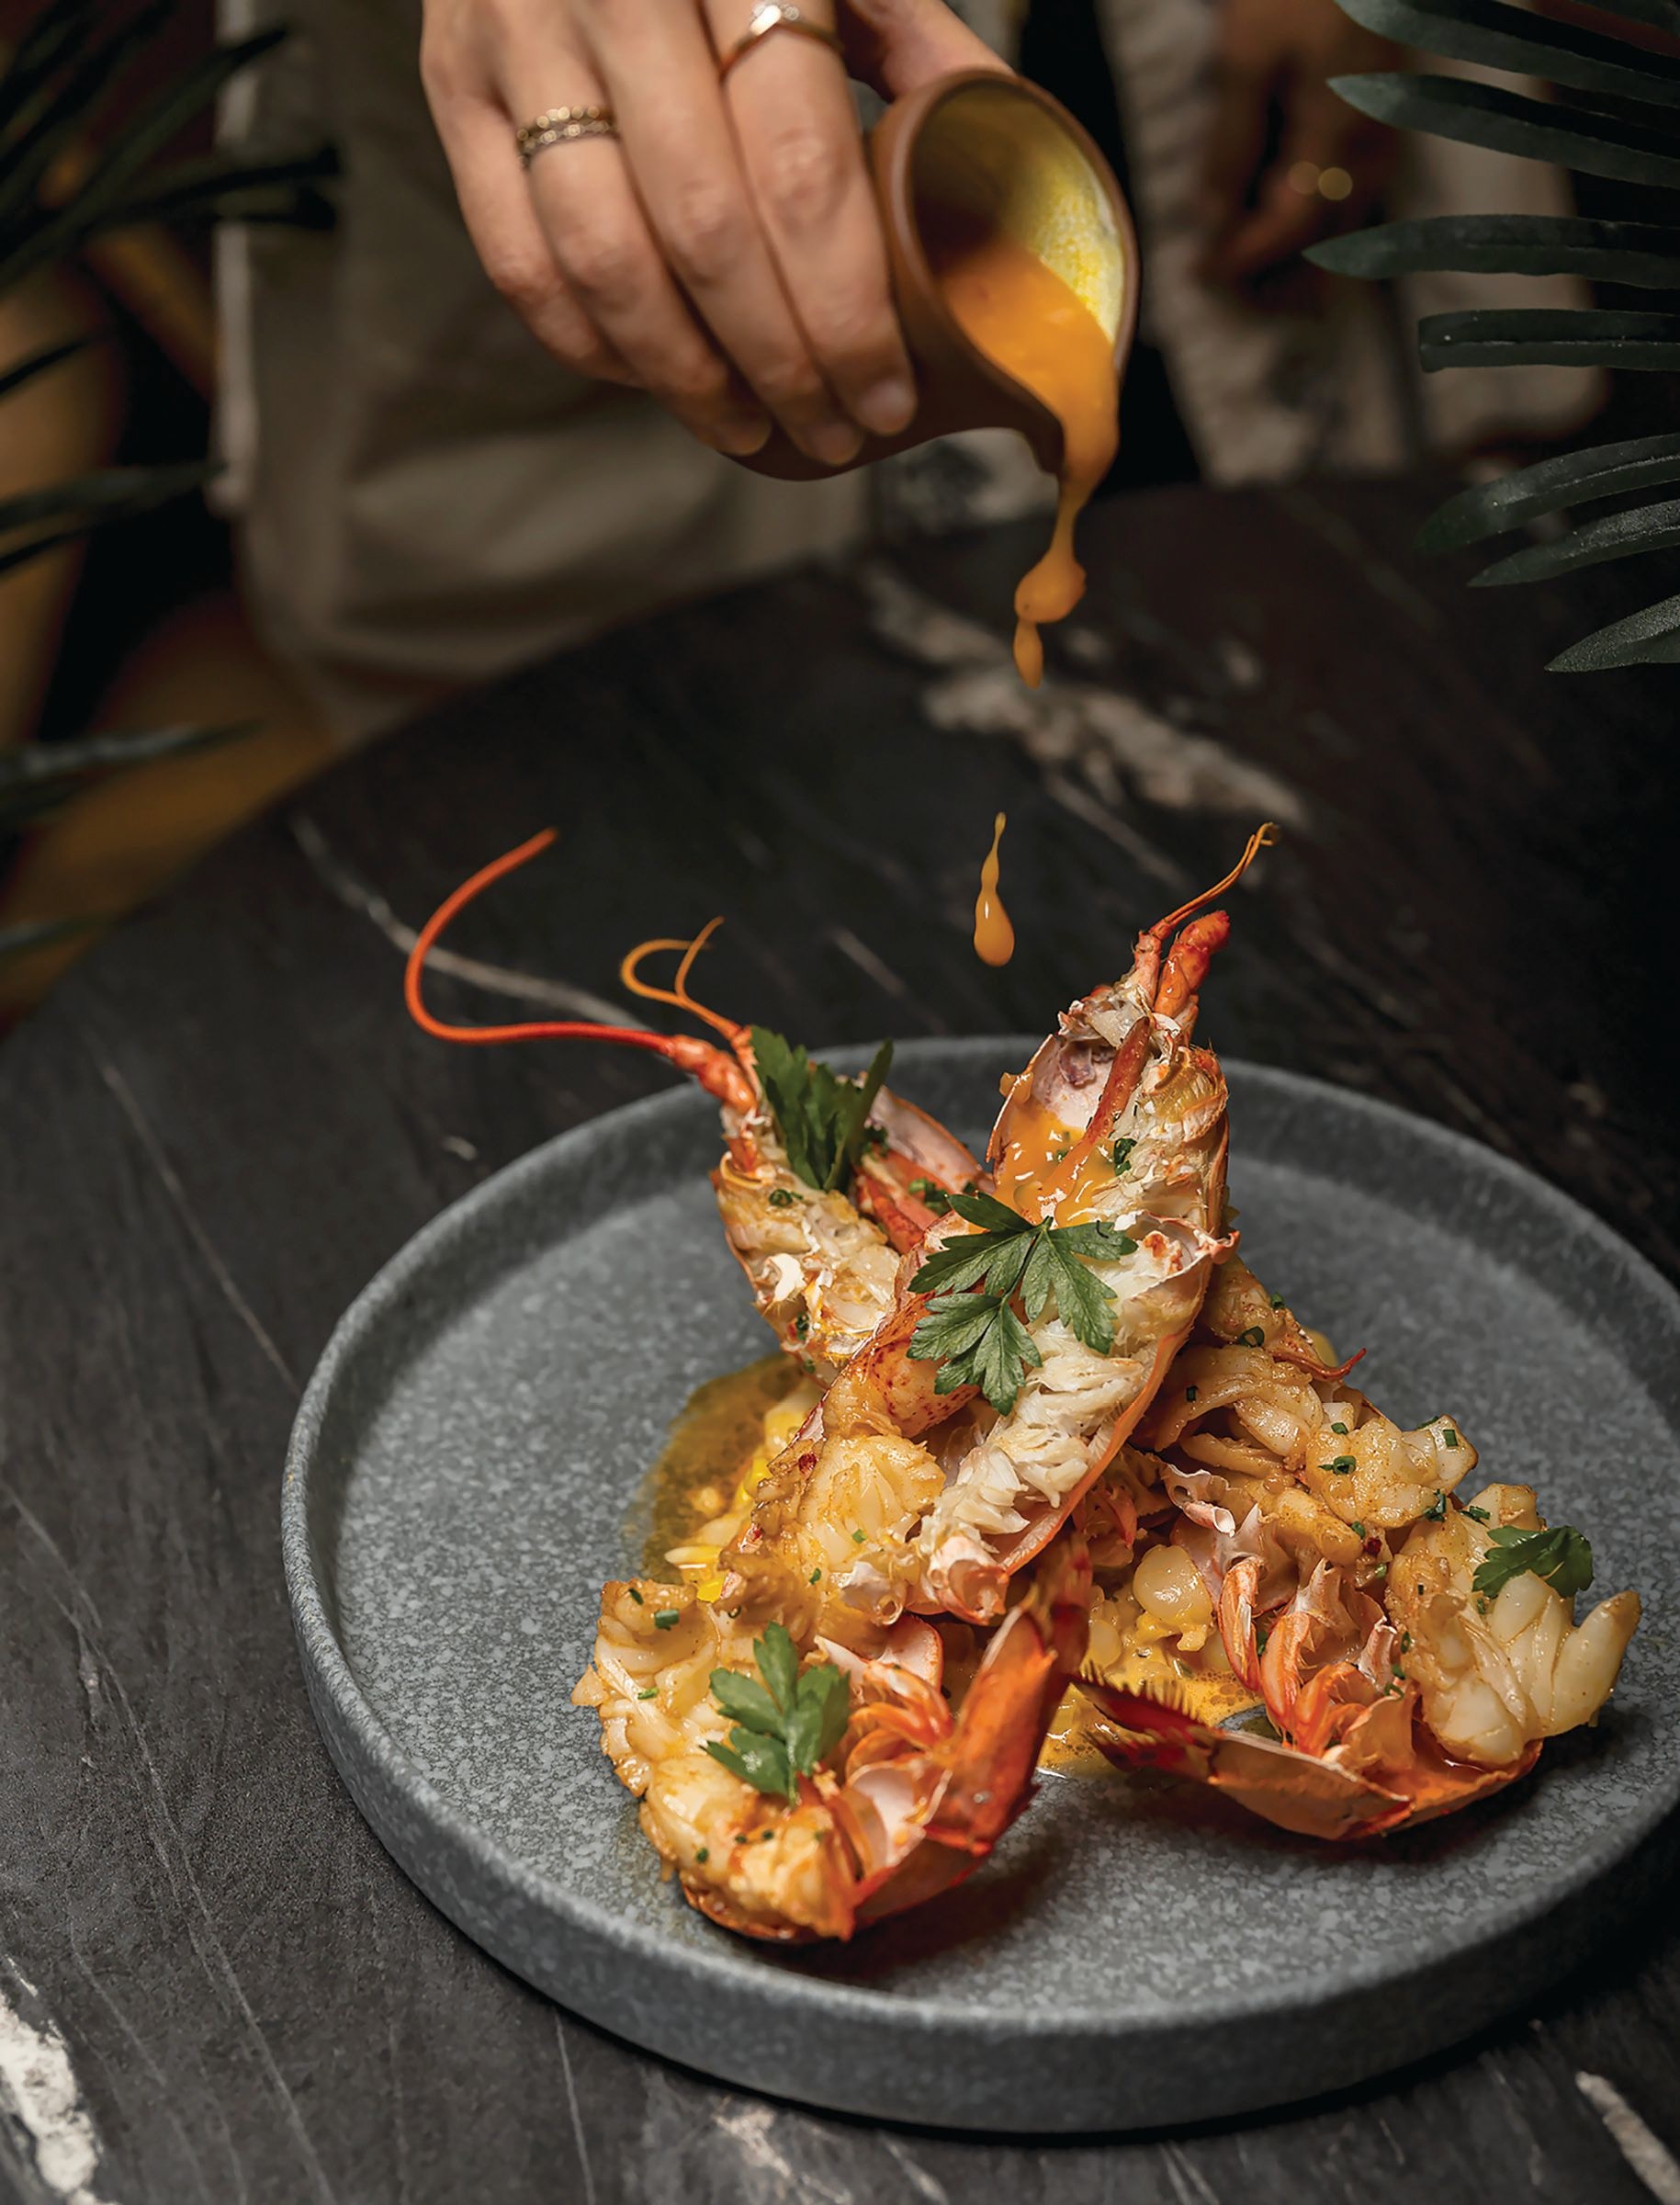 Indulgent Caribbean lobster is finished with creamed corn and passion fruit mojo. PHOTO BY WADE HALL